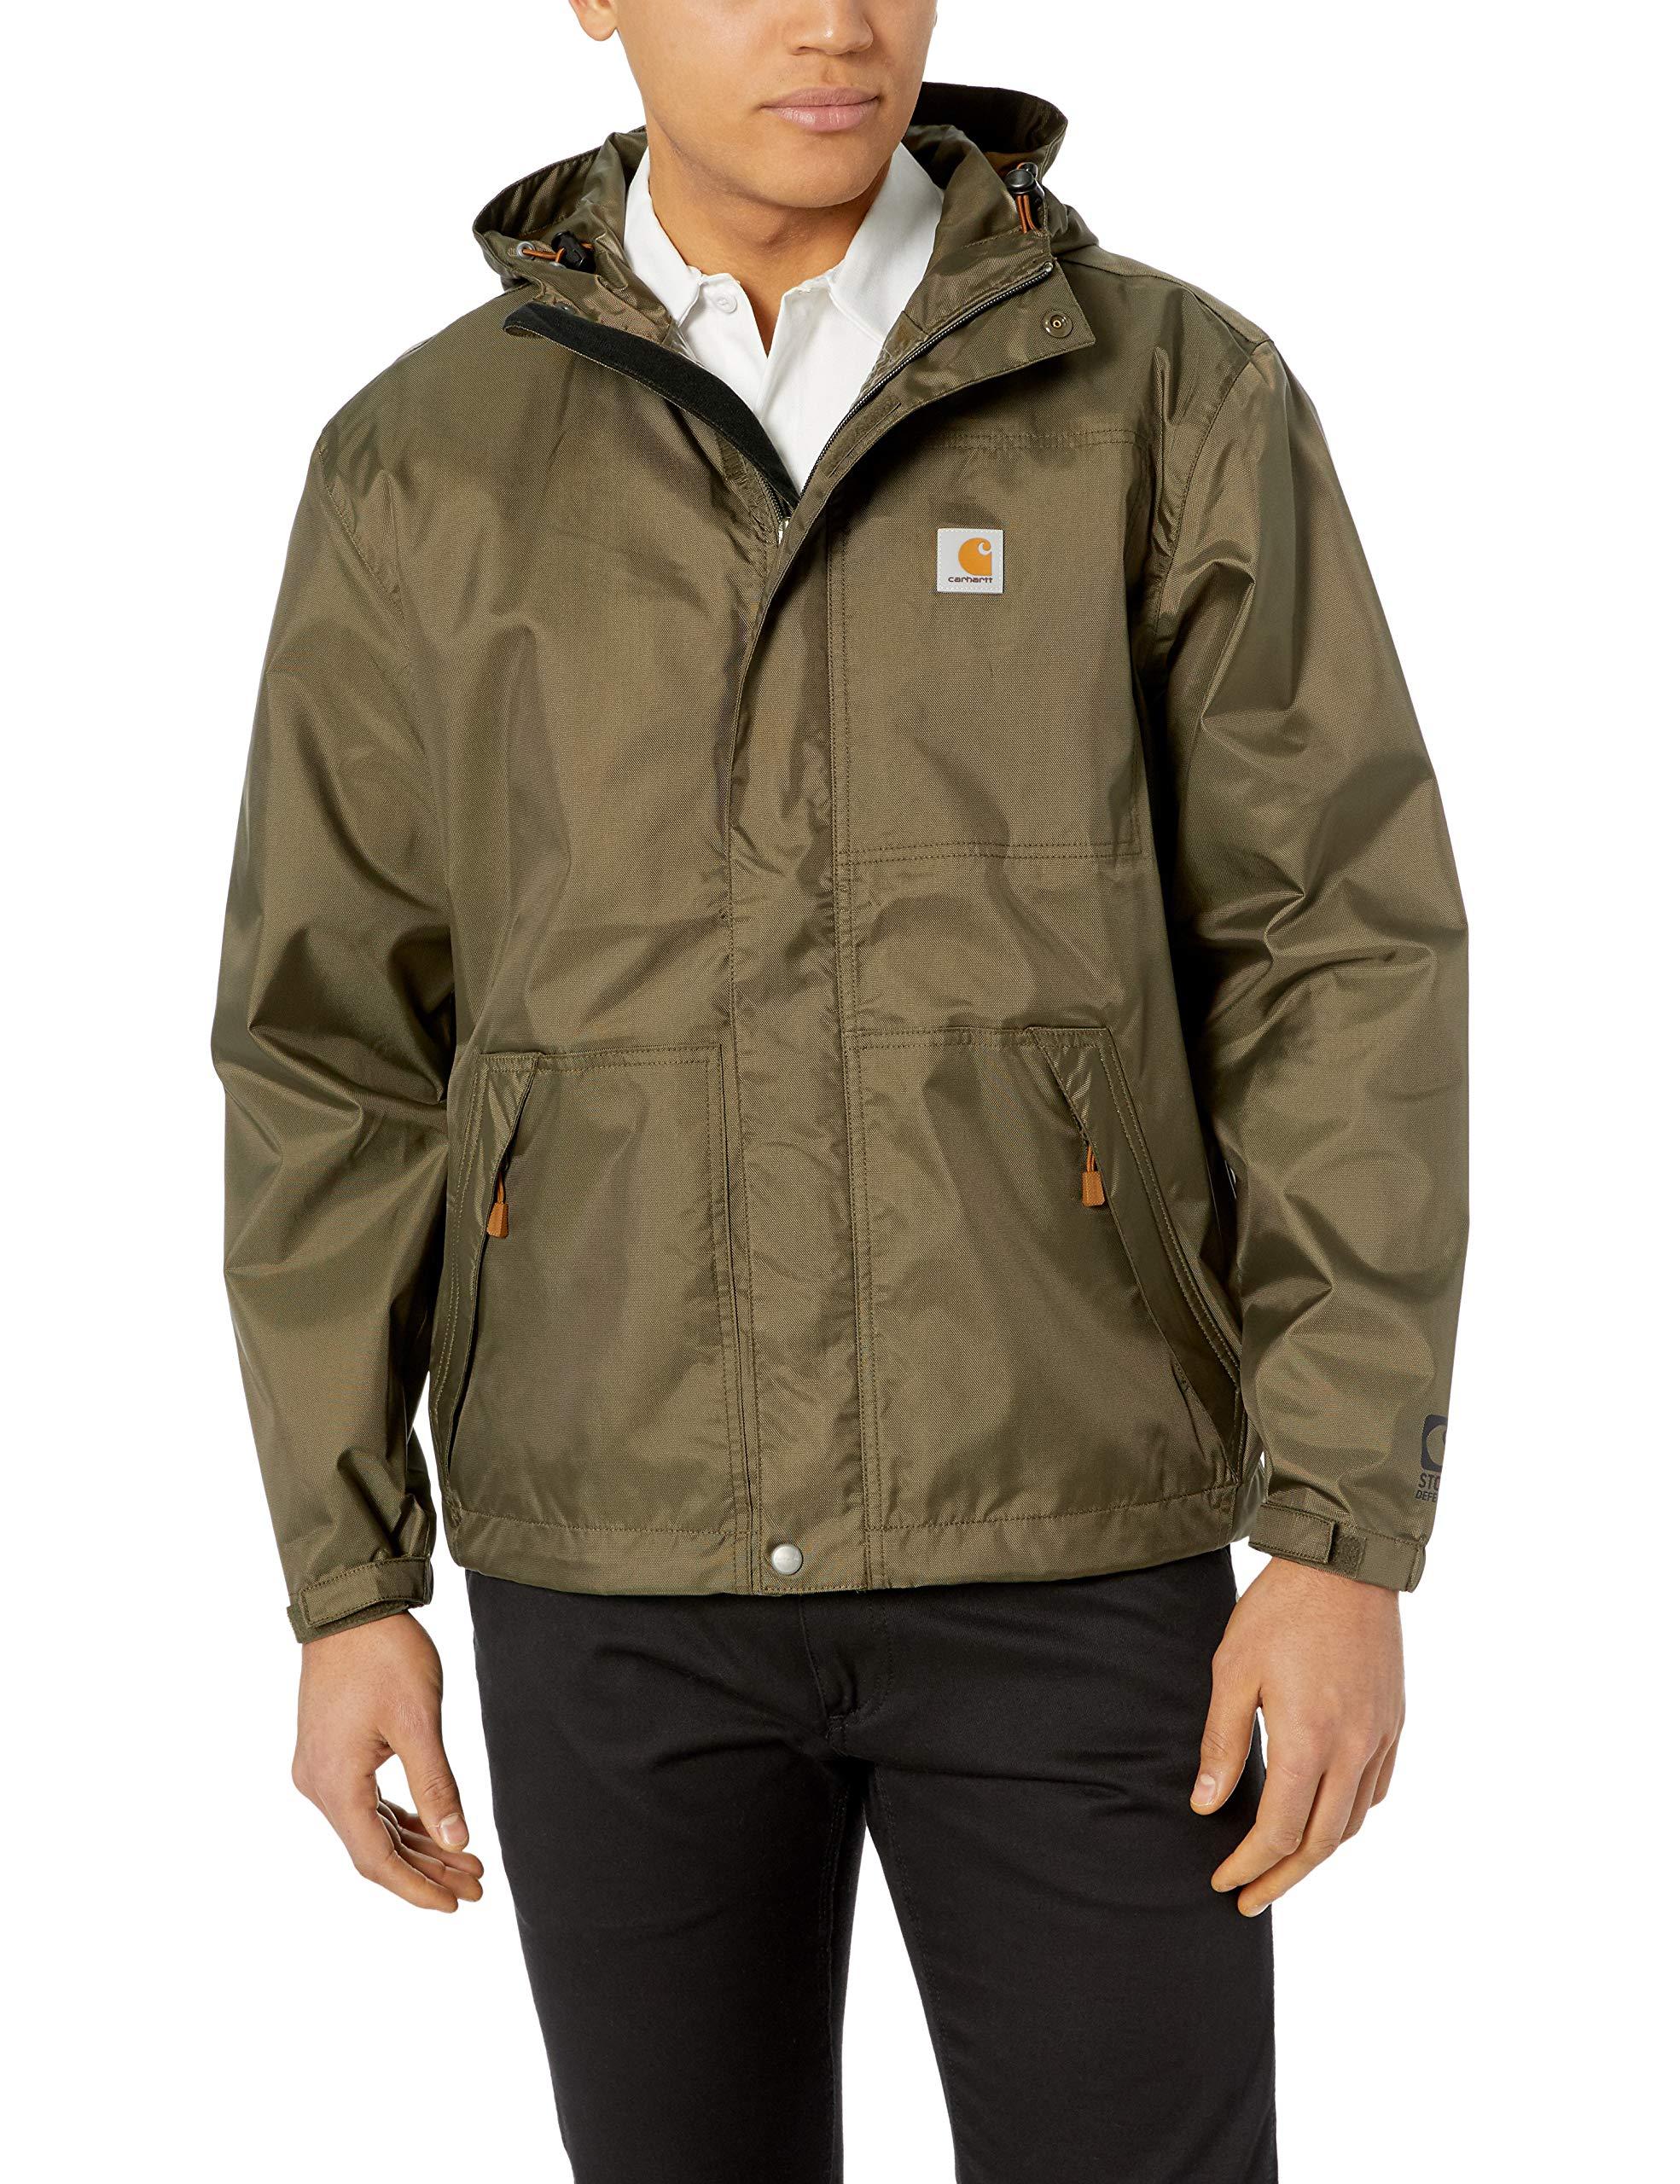 Carhartt Synthetic Dry Harbor Jacket in Green for Men - Lyst